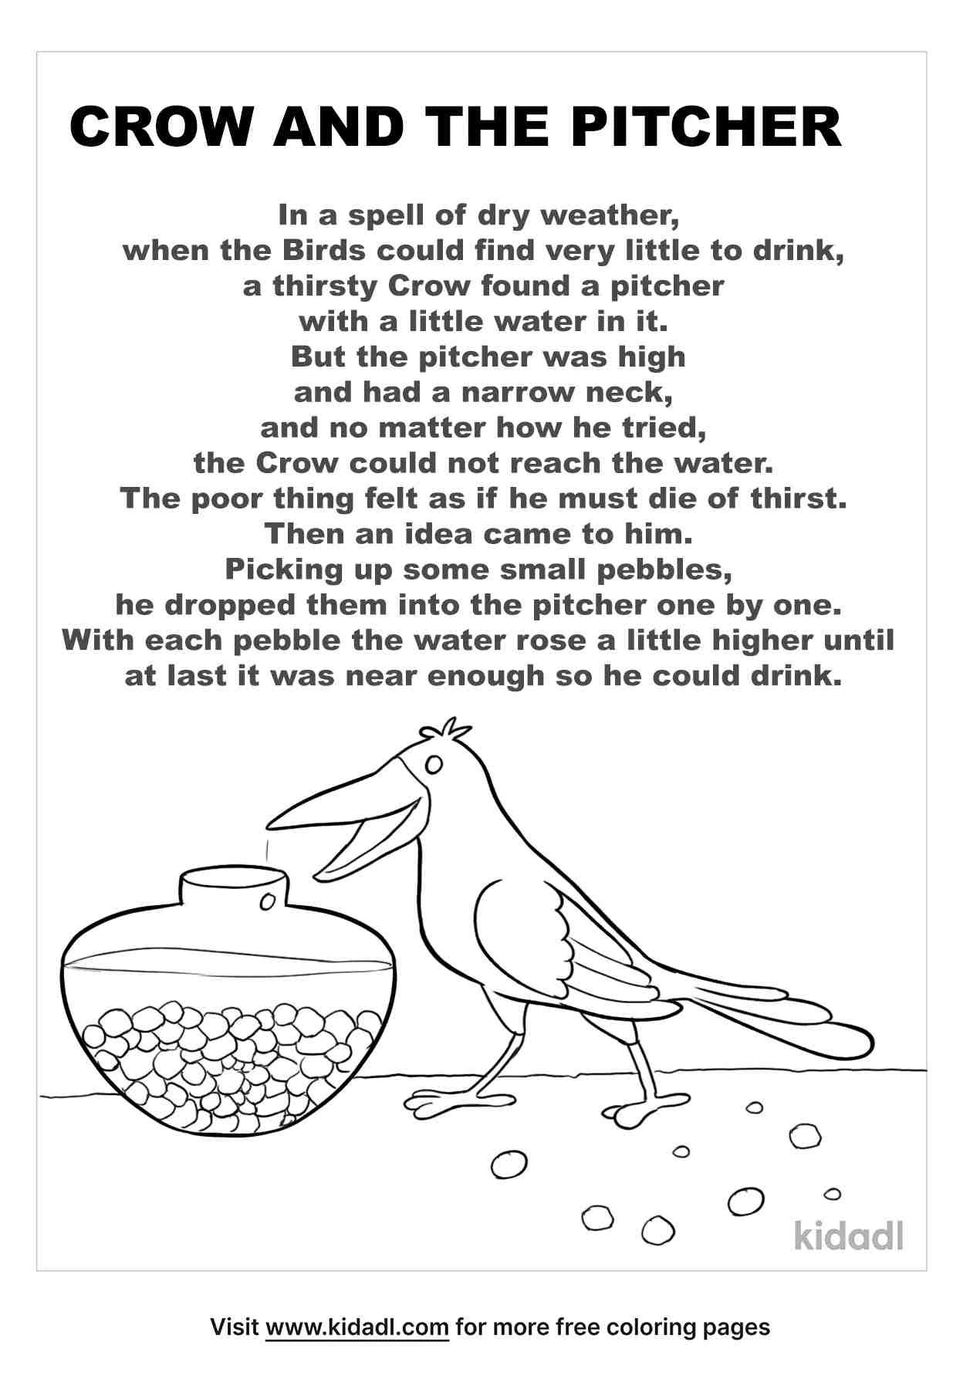 Crow and the Pitcher story and coloring page.